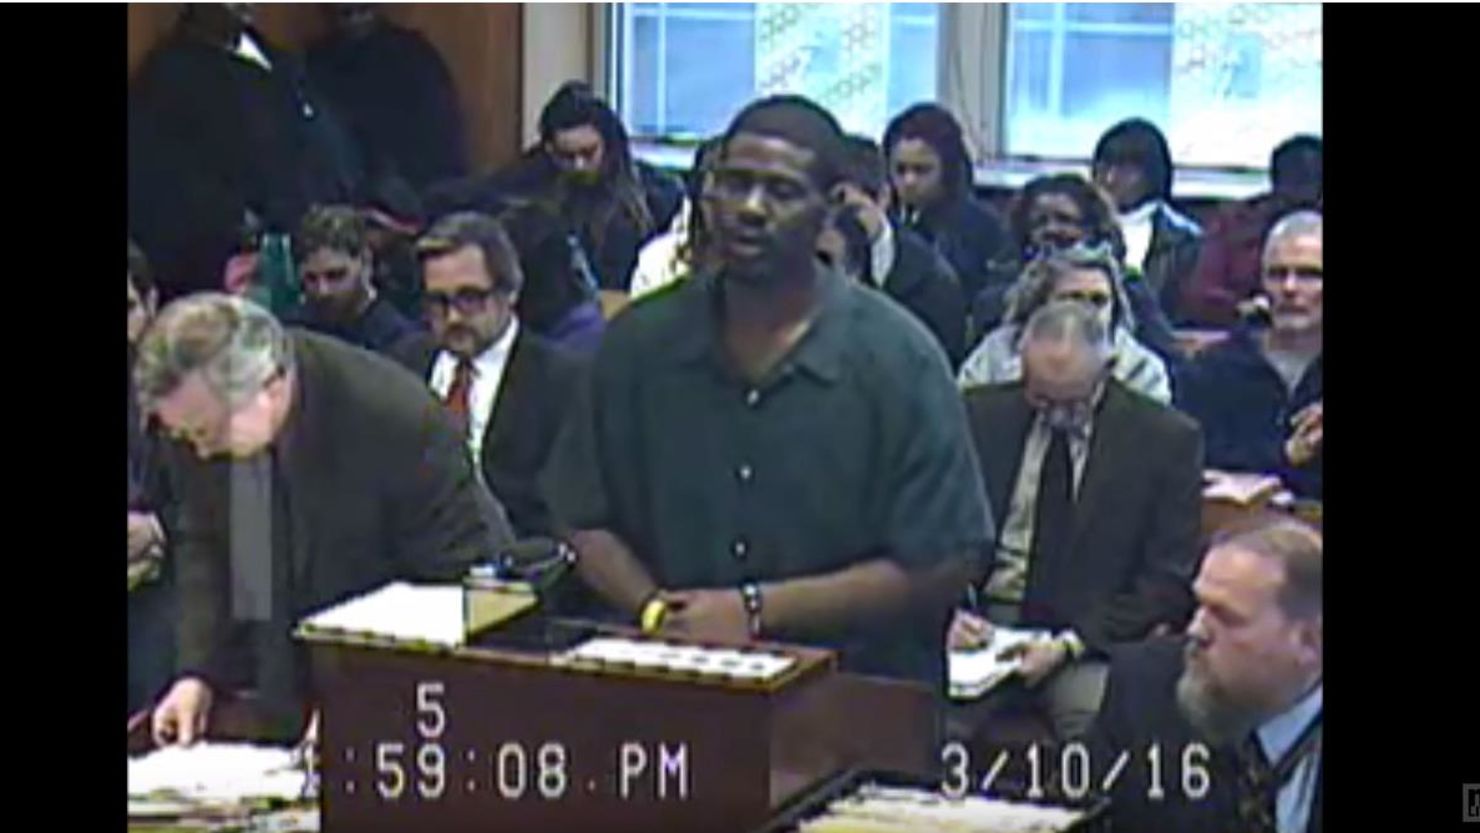 Brian Earl Taylor sings an apology before being sentenced in an Ann Arbor, Michigan, courtroom.